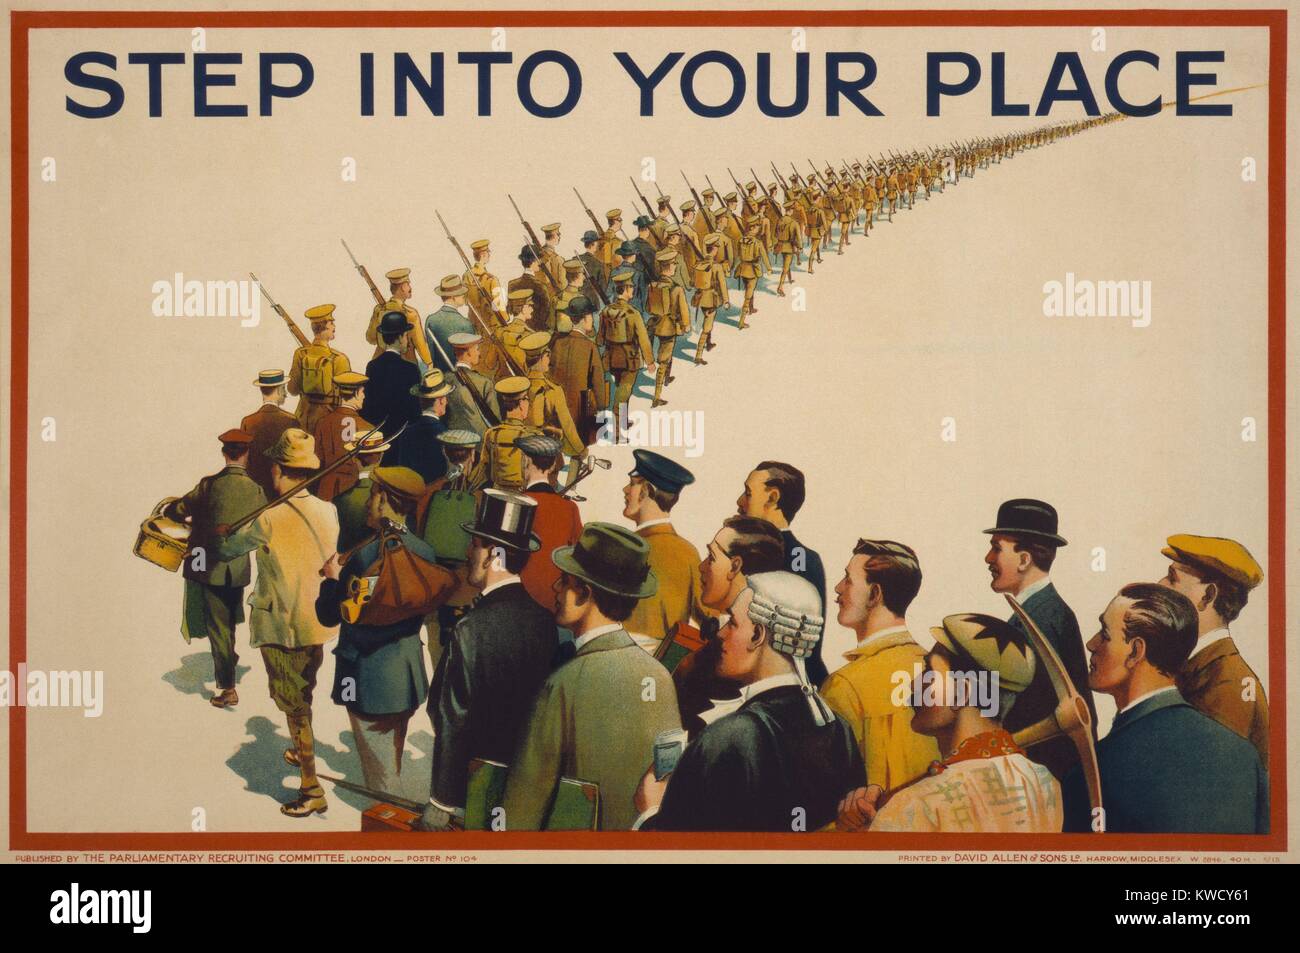 STEP INTO YOUR PLACE, reads a British World War 1 recruiting poster, 1915. A column of soldiers marches into the distance, are joined by men in civilian attire that identifies their various occupations and social classes (BSLOC 2017 1 34) Stock Photo